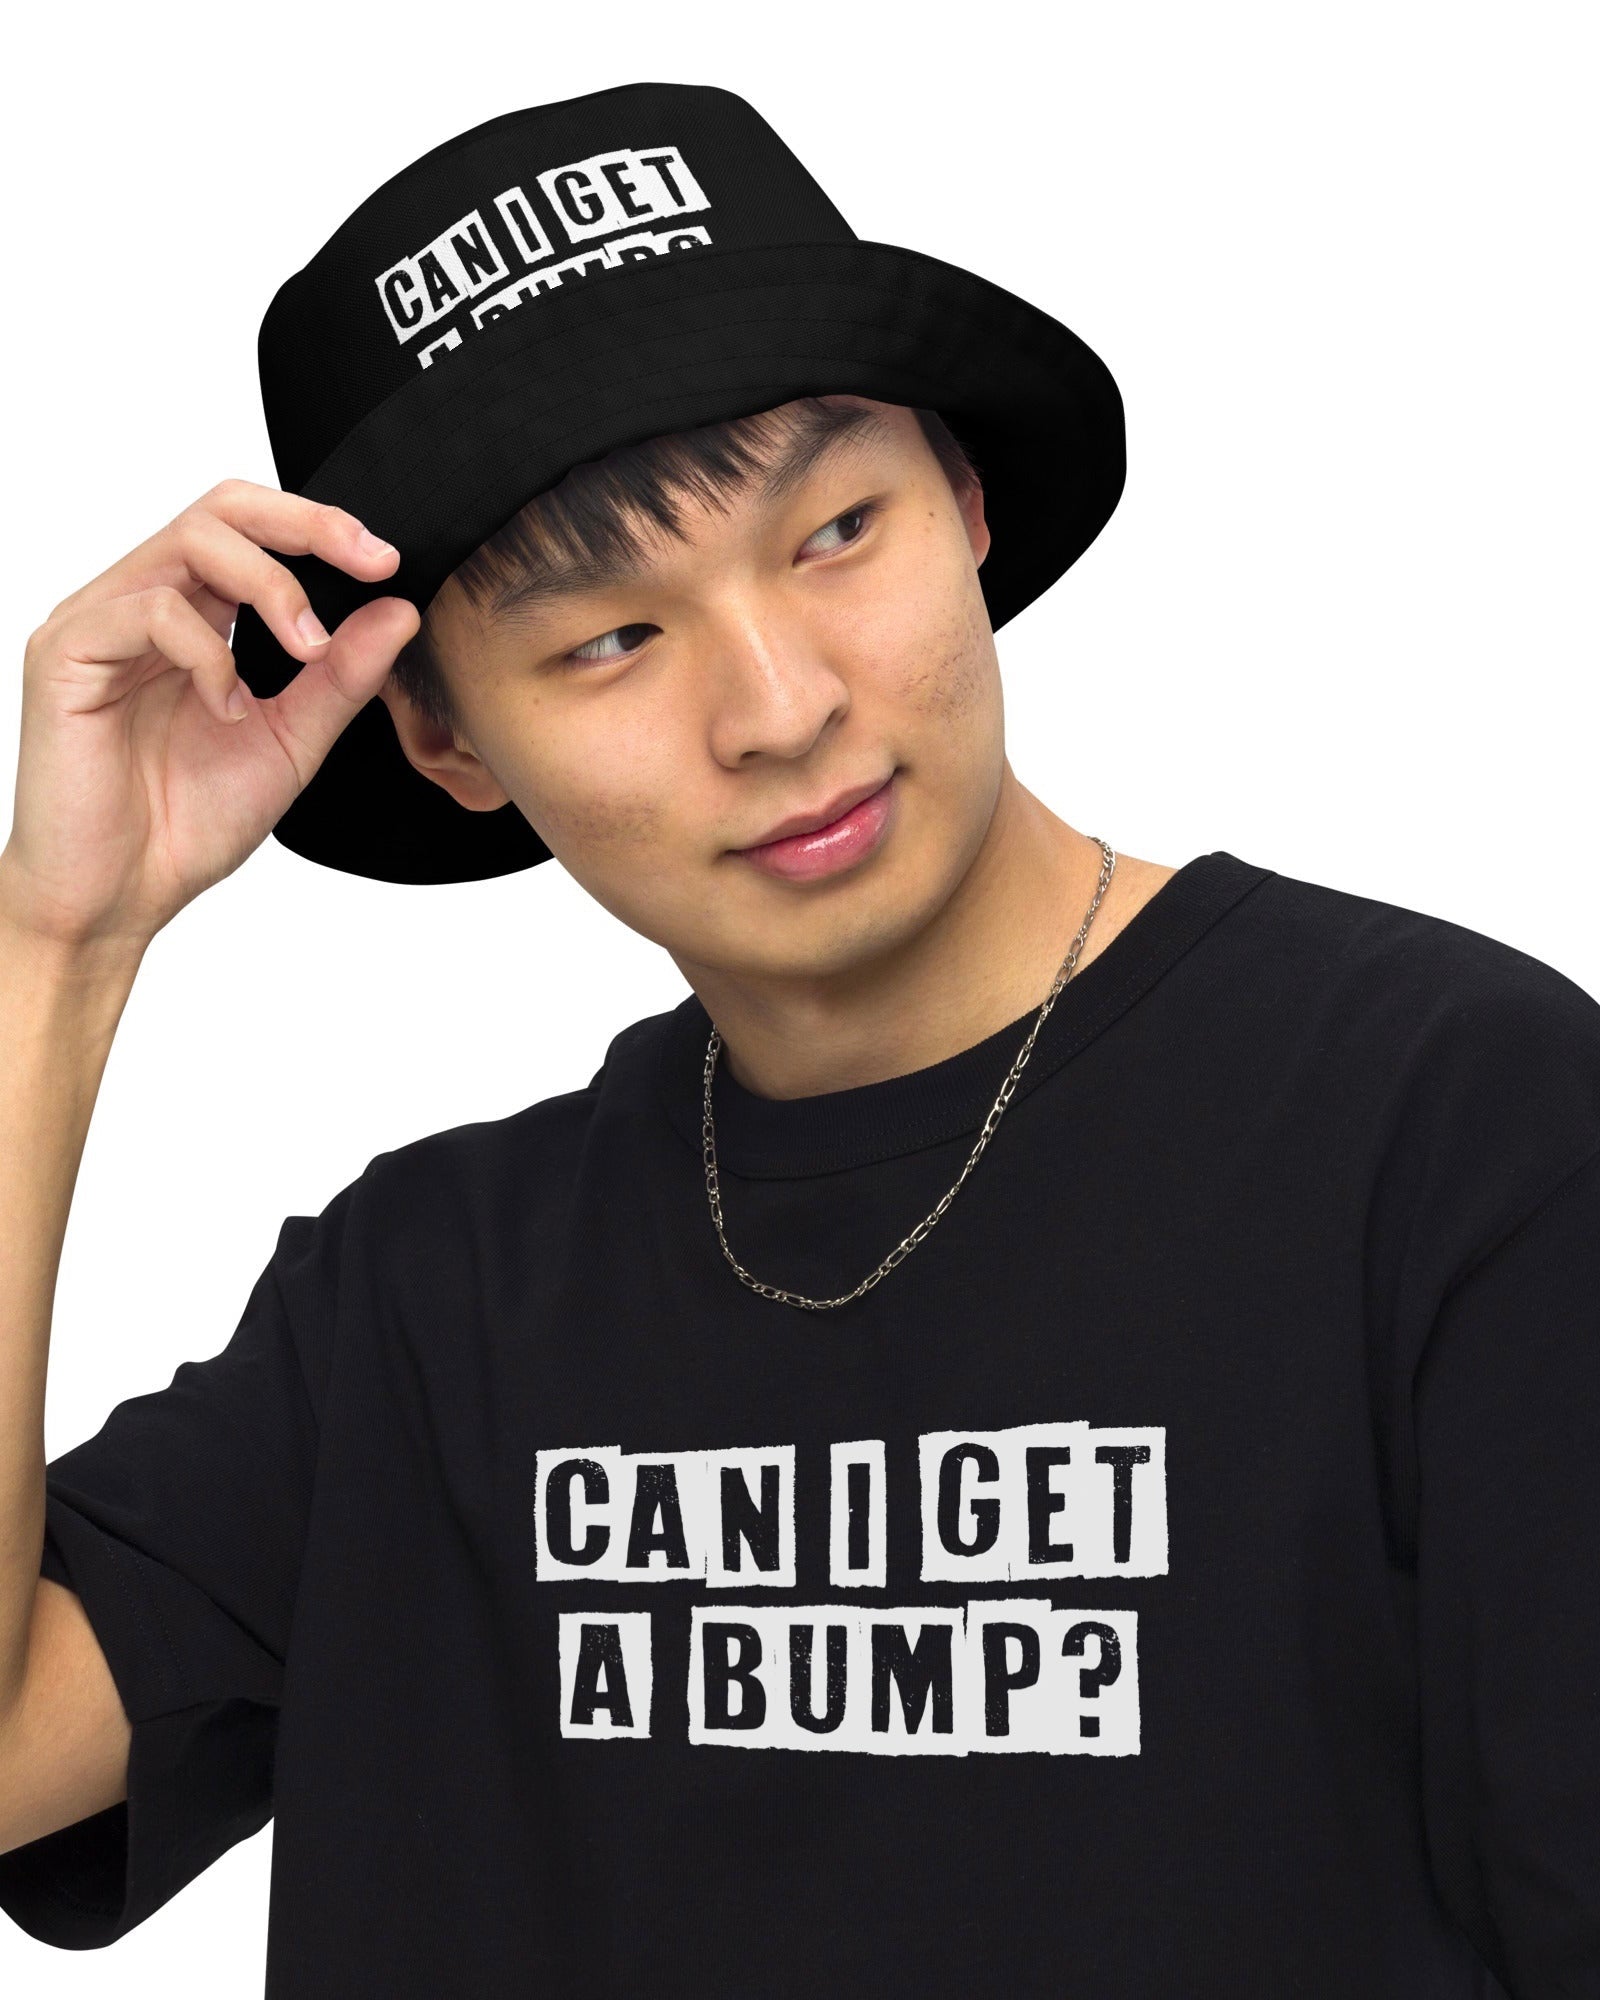 Model wearing a black bucket hat & t-shirt with the phrase "CAN I GET A BUMP?".